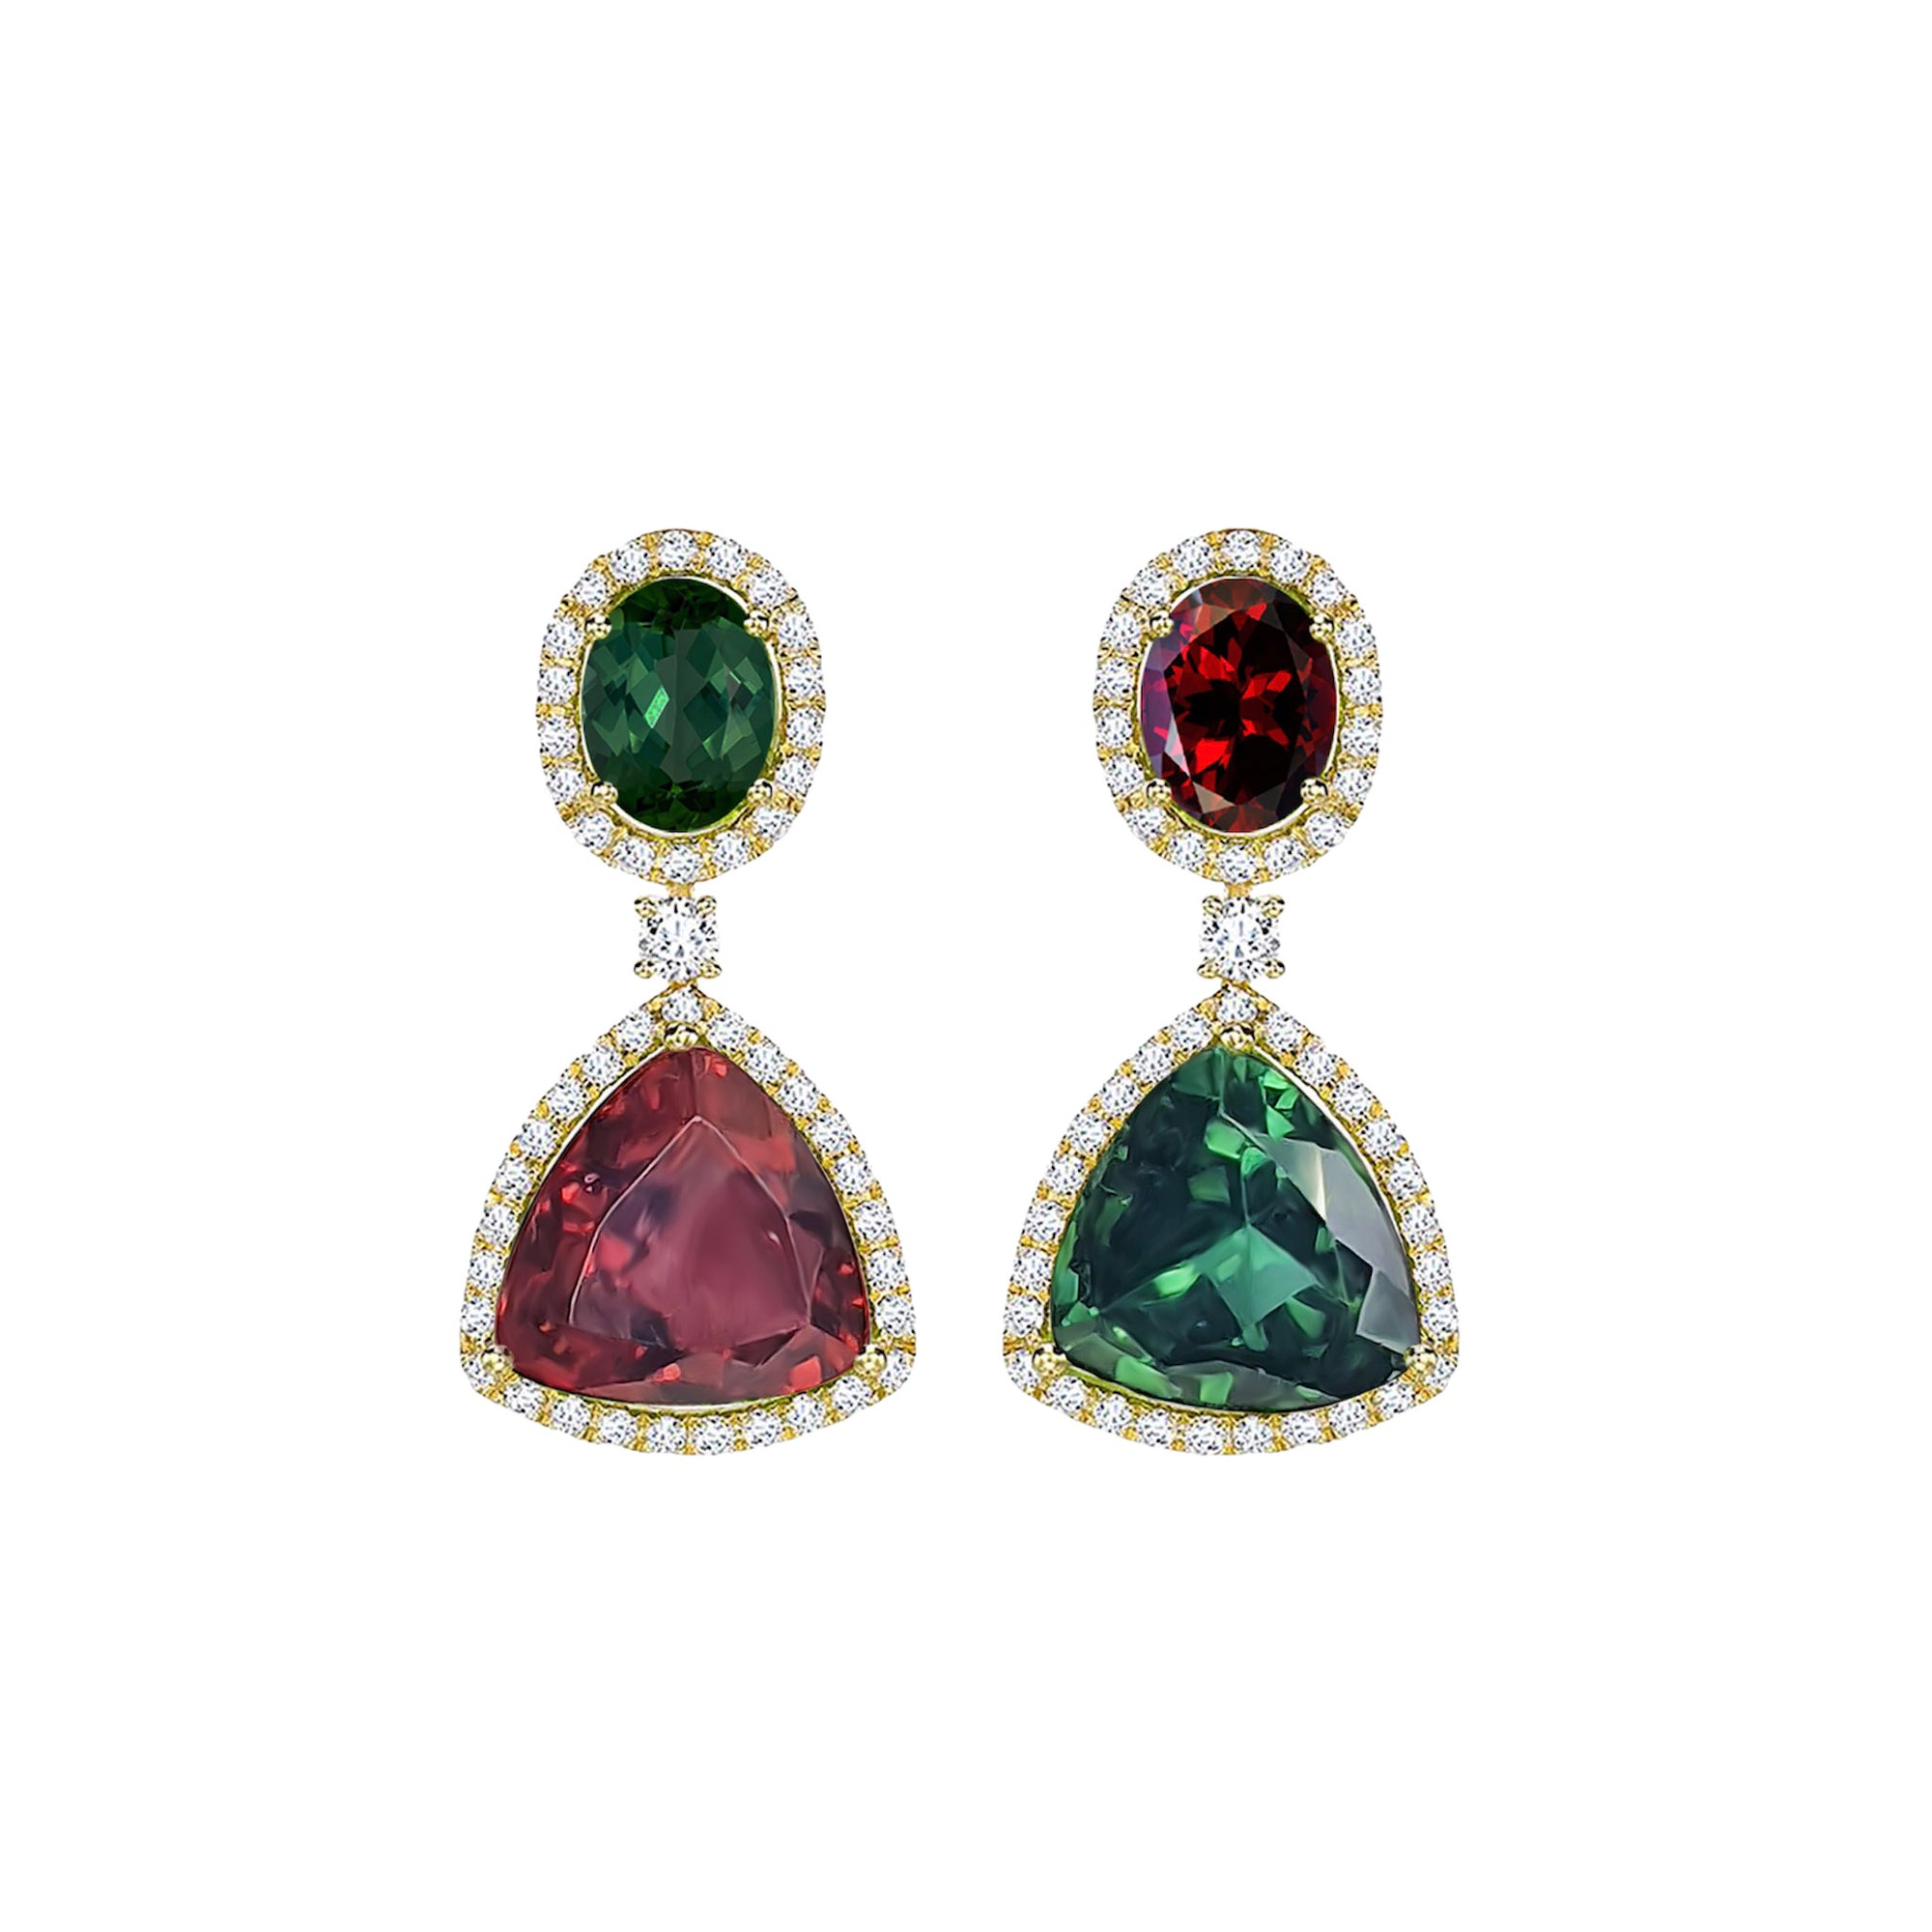 Olive Two Tones Gemstones Halo Earrings - Pink Green Trillion W136